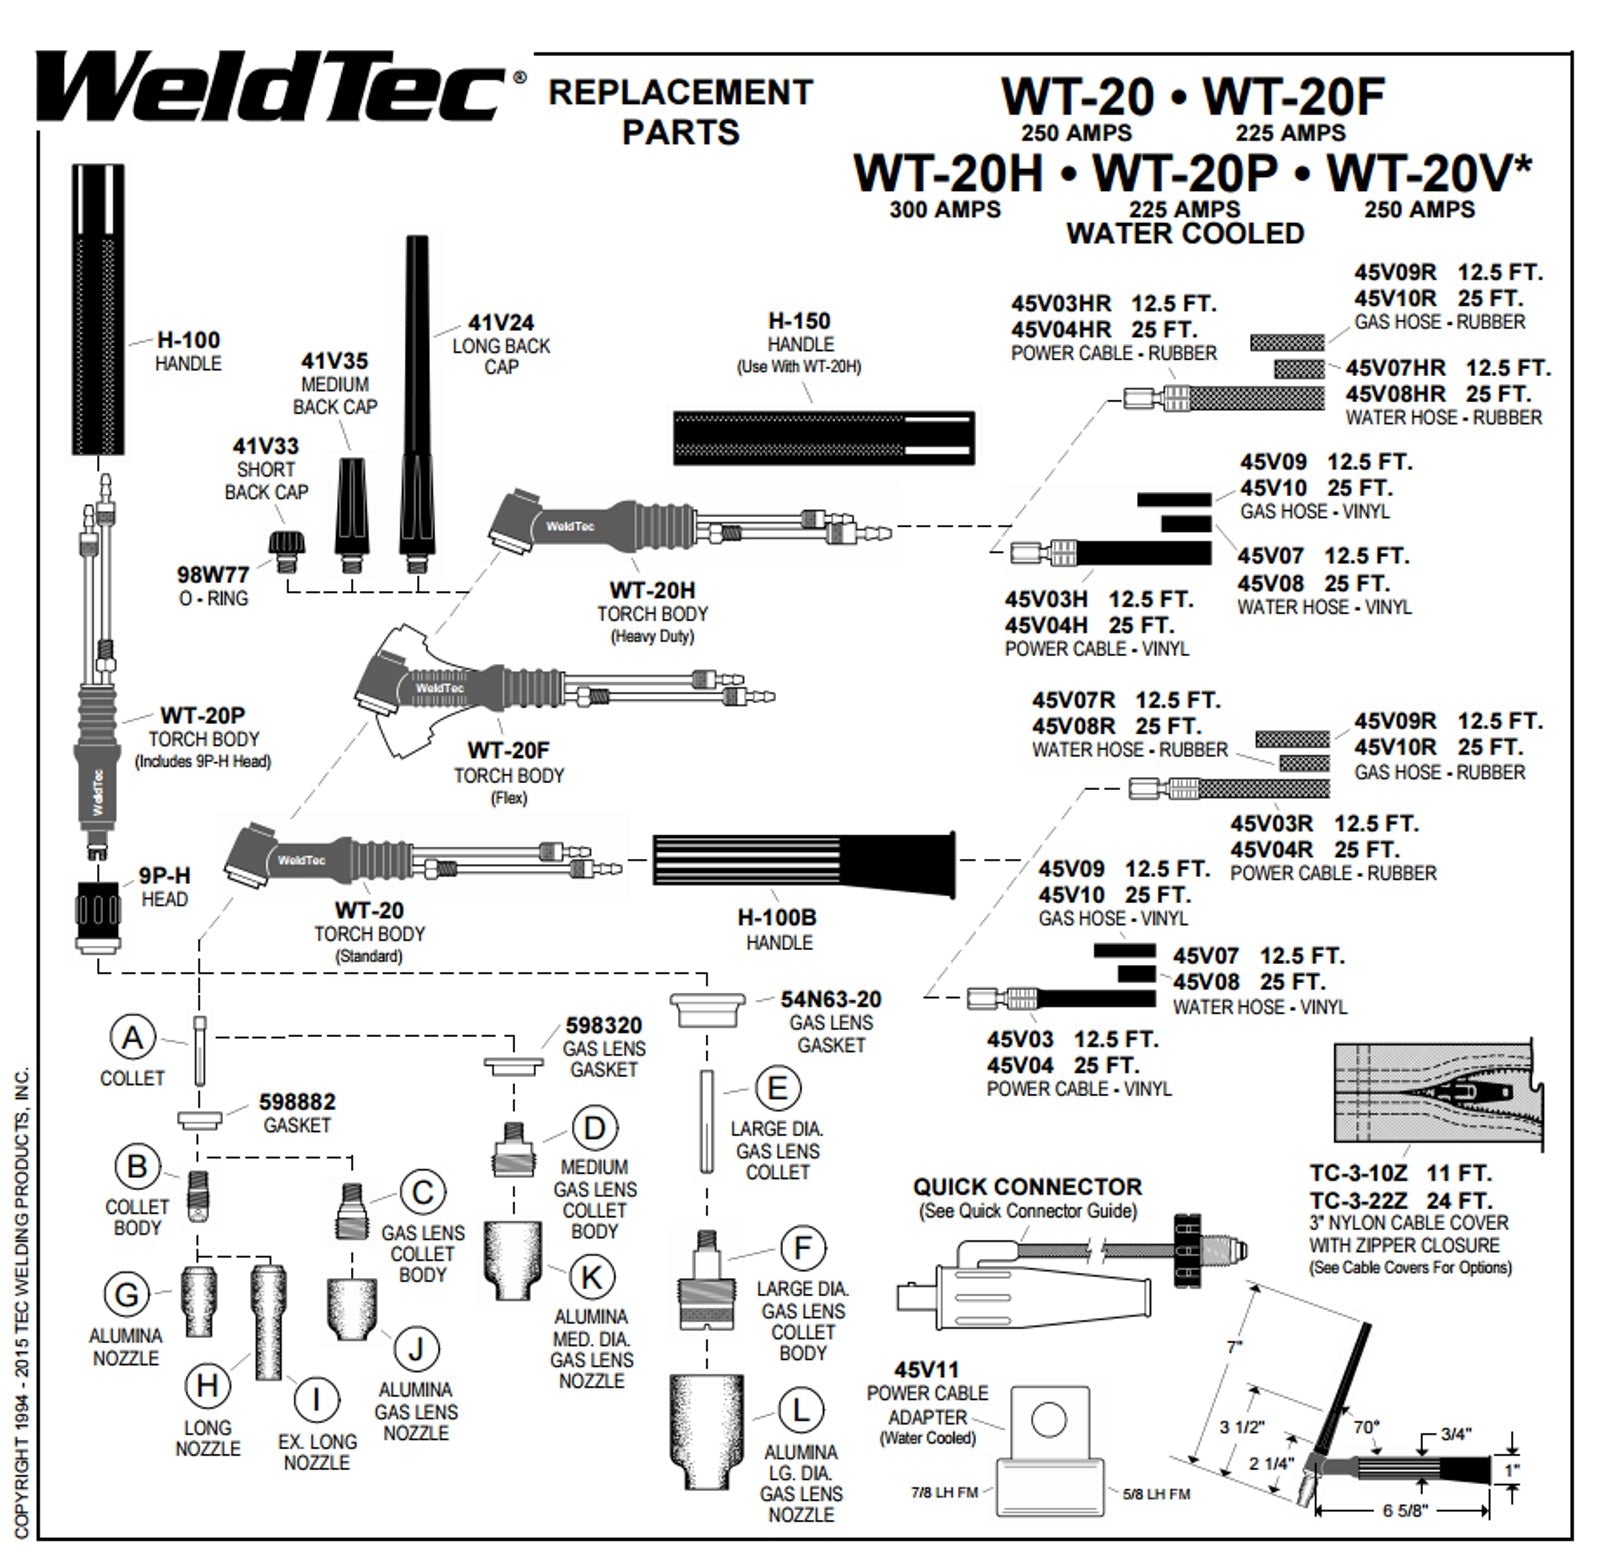 Weldtec 250 Amp Water Cooled TIG Torch 25' (WT-20-25)